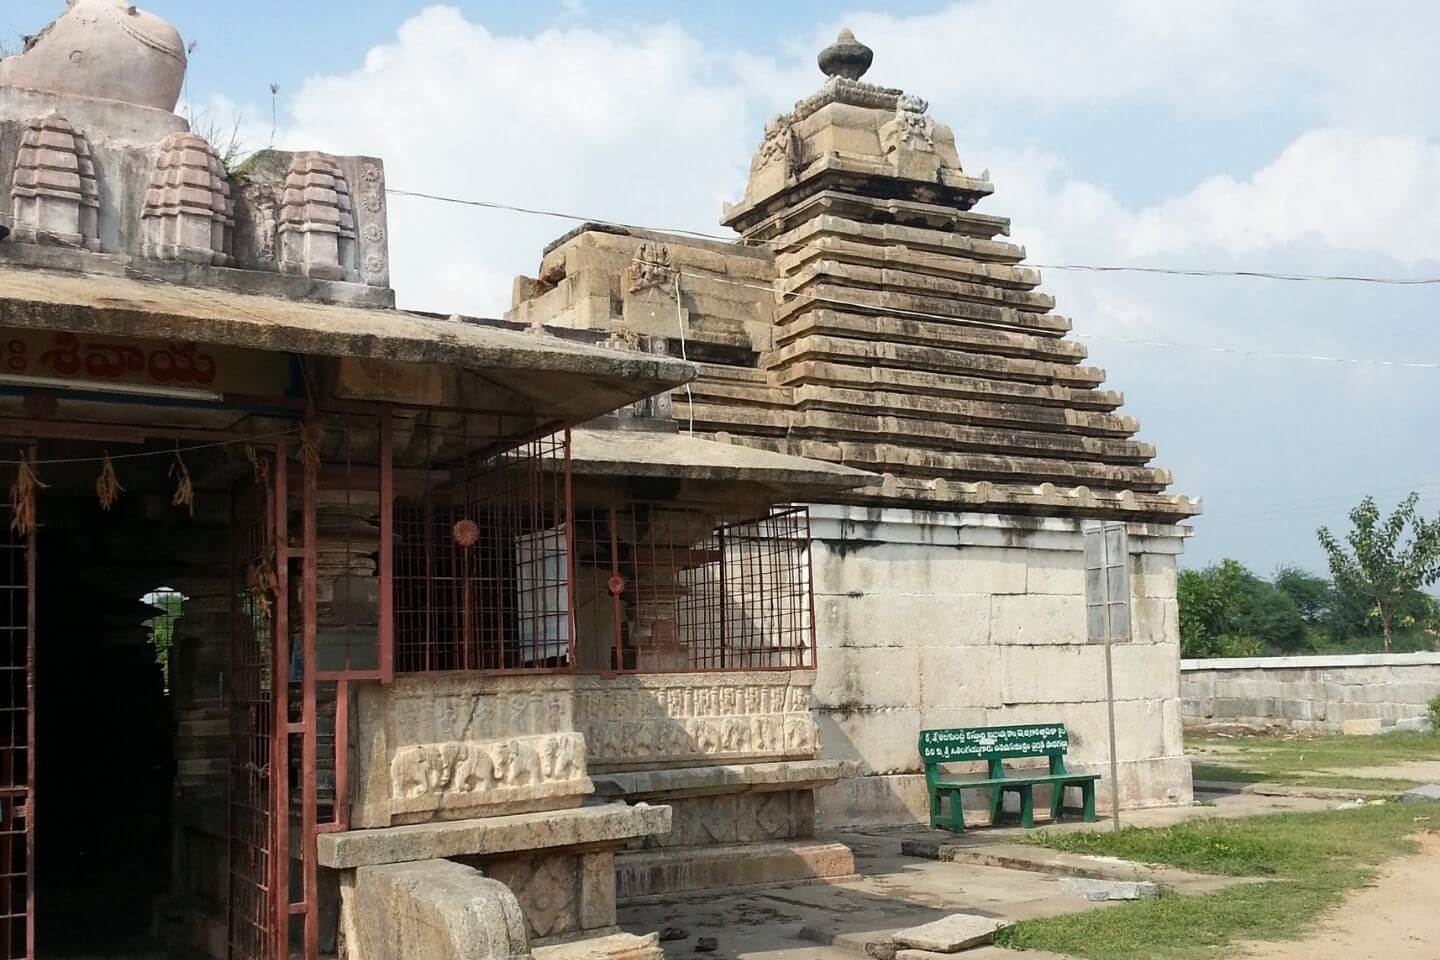 Chaya Someshwara Temple, Panagal - Tourist Place to Visit from Hyderabad within 200 km with Family